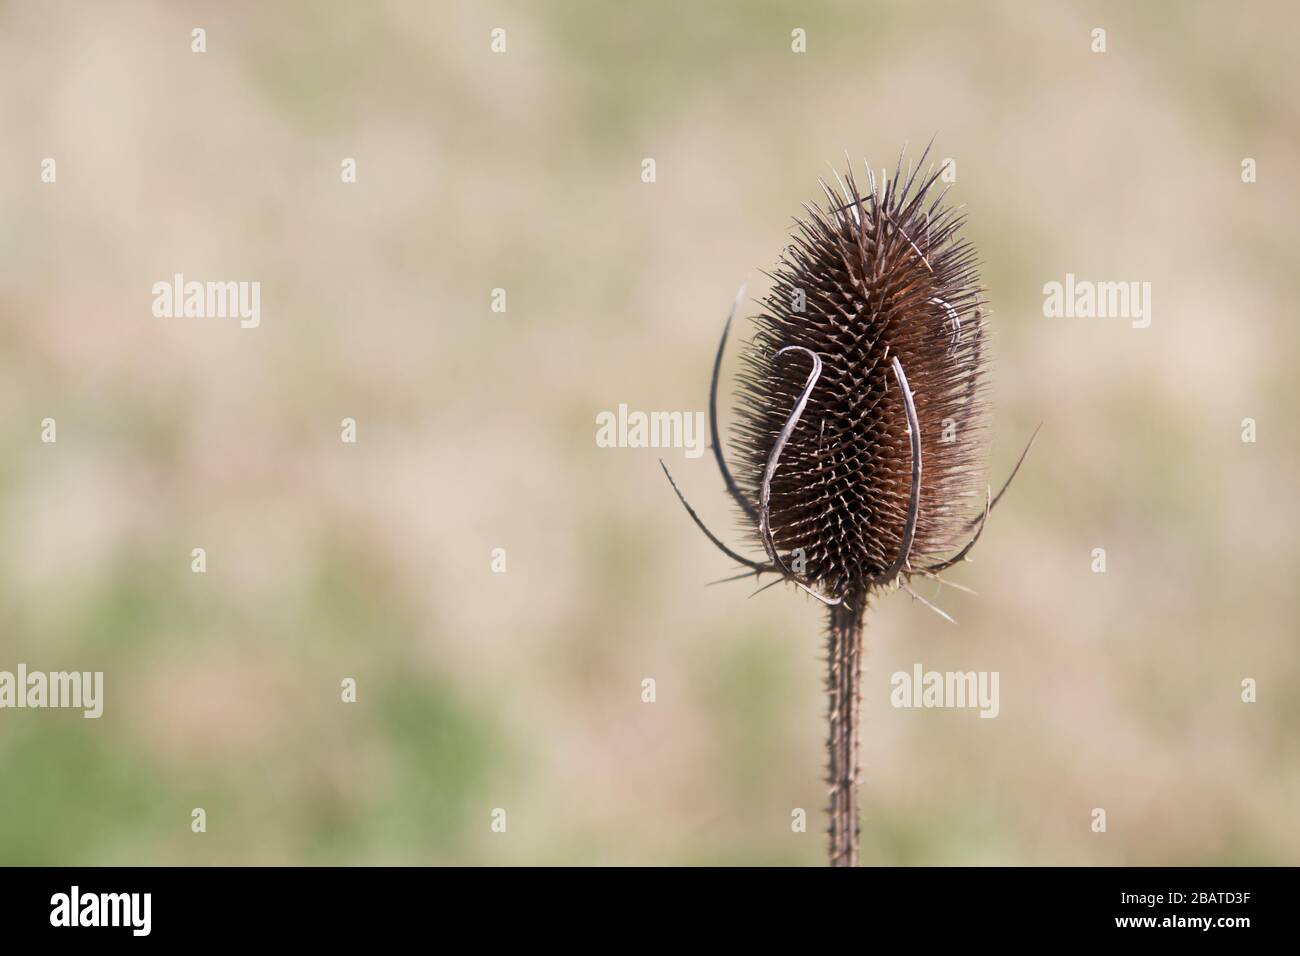 A dry Fuller's teasel (Dipsacus sativus fullonum) flower by a sunny winter afternoon Stock Photo